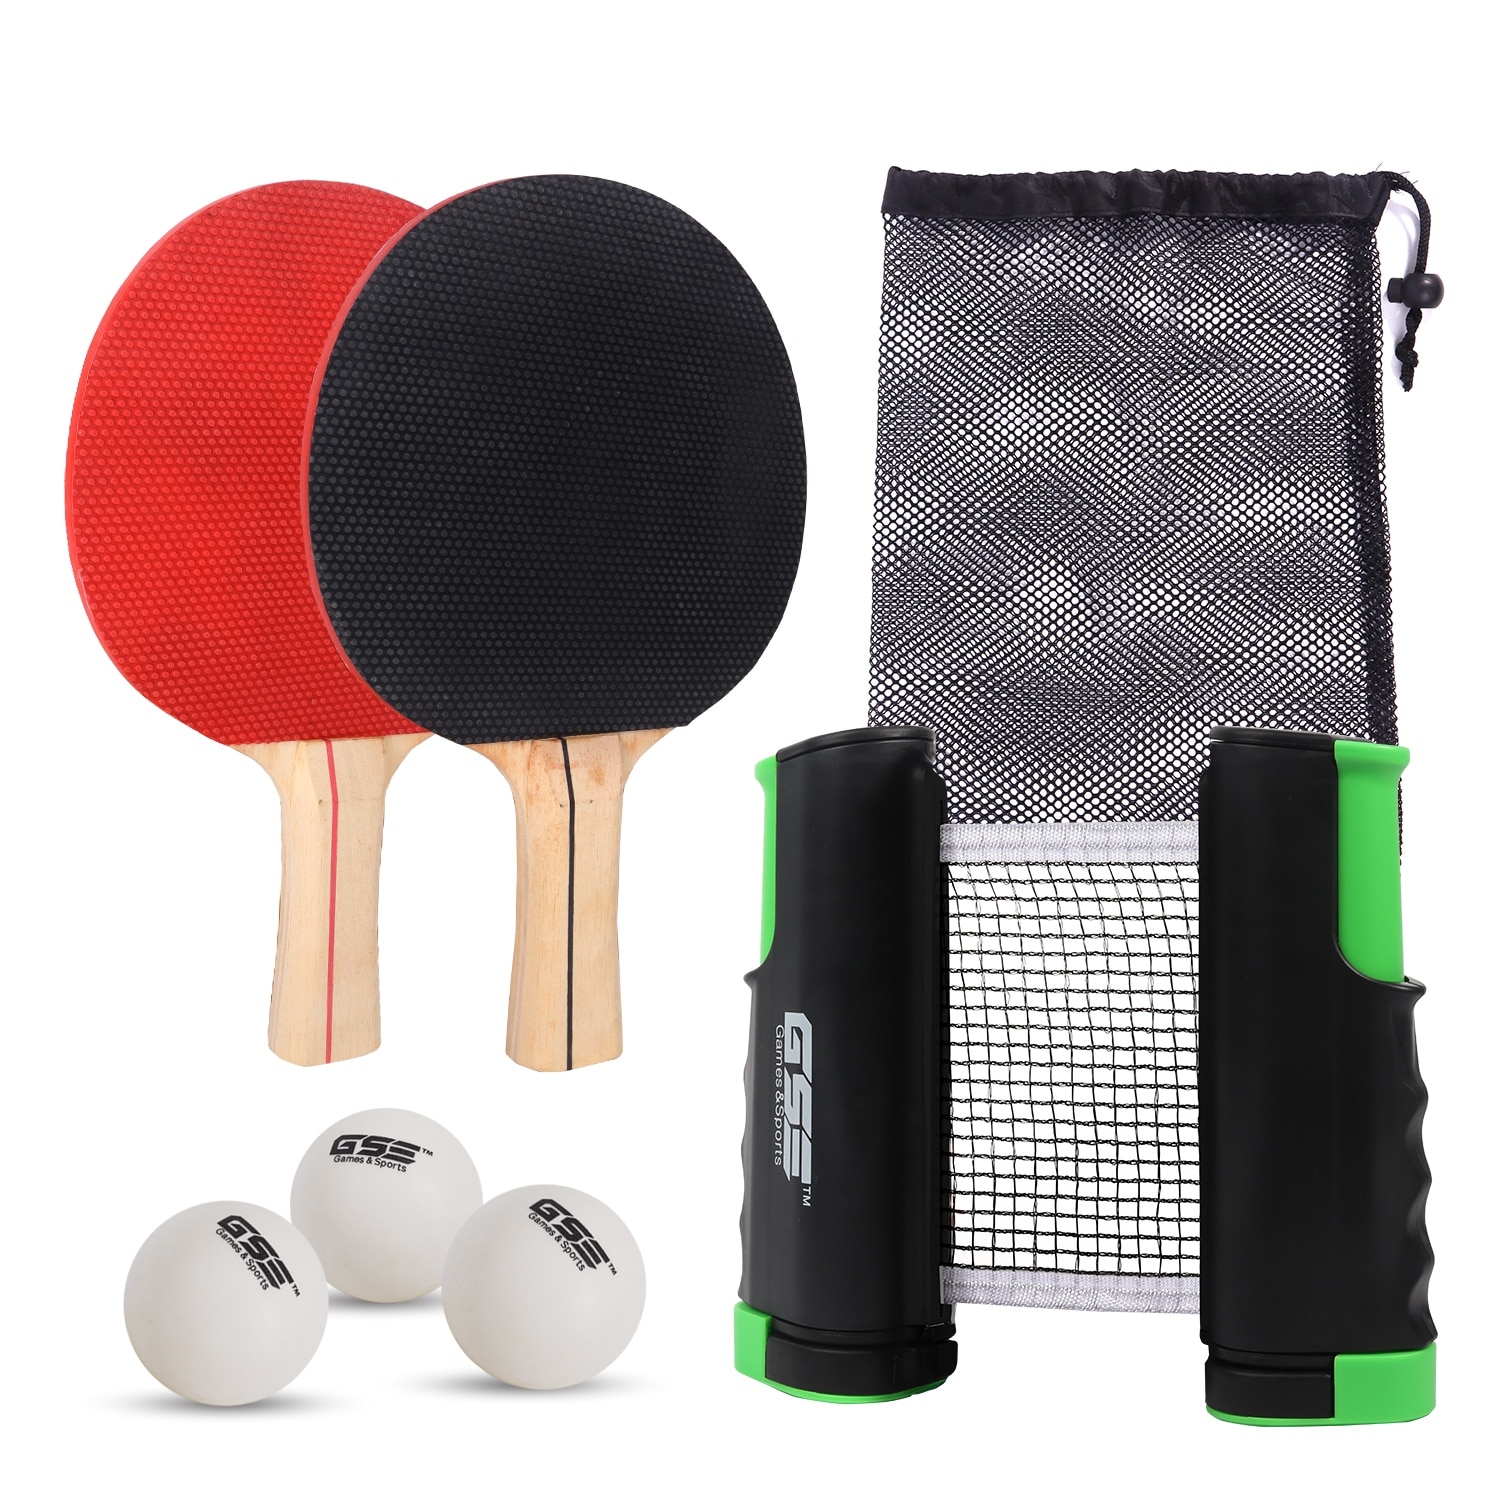 Table Tennis Table Ping Pong Table Foldable W/2 Paddles+3 Balls